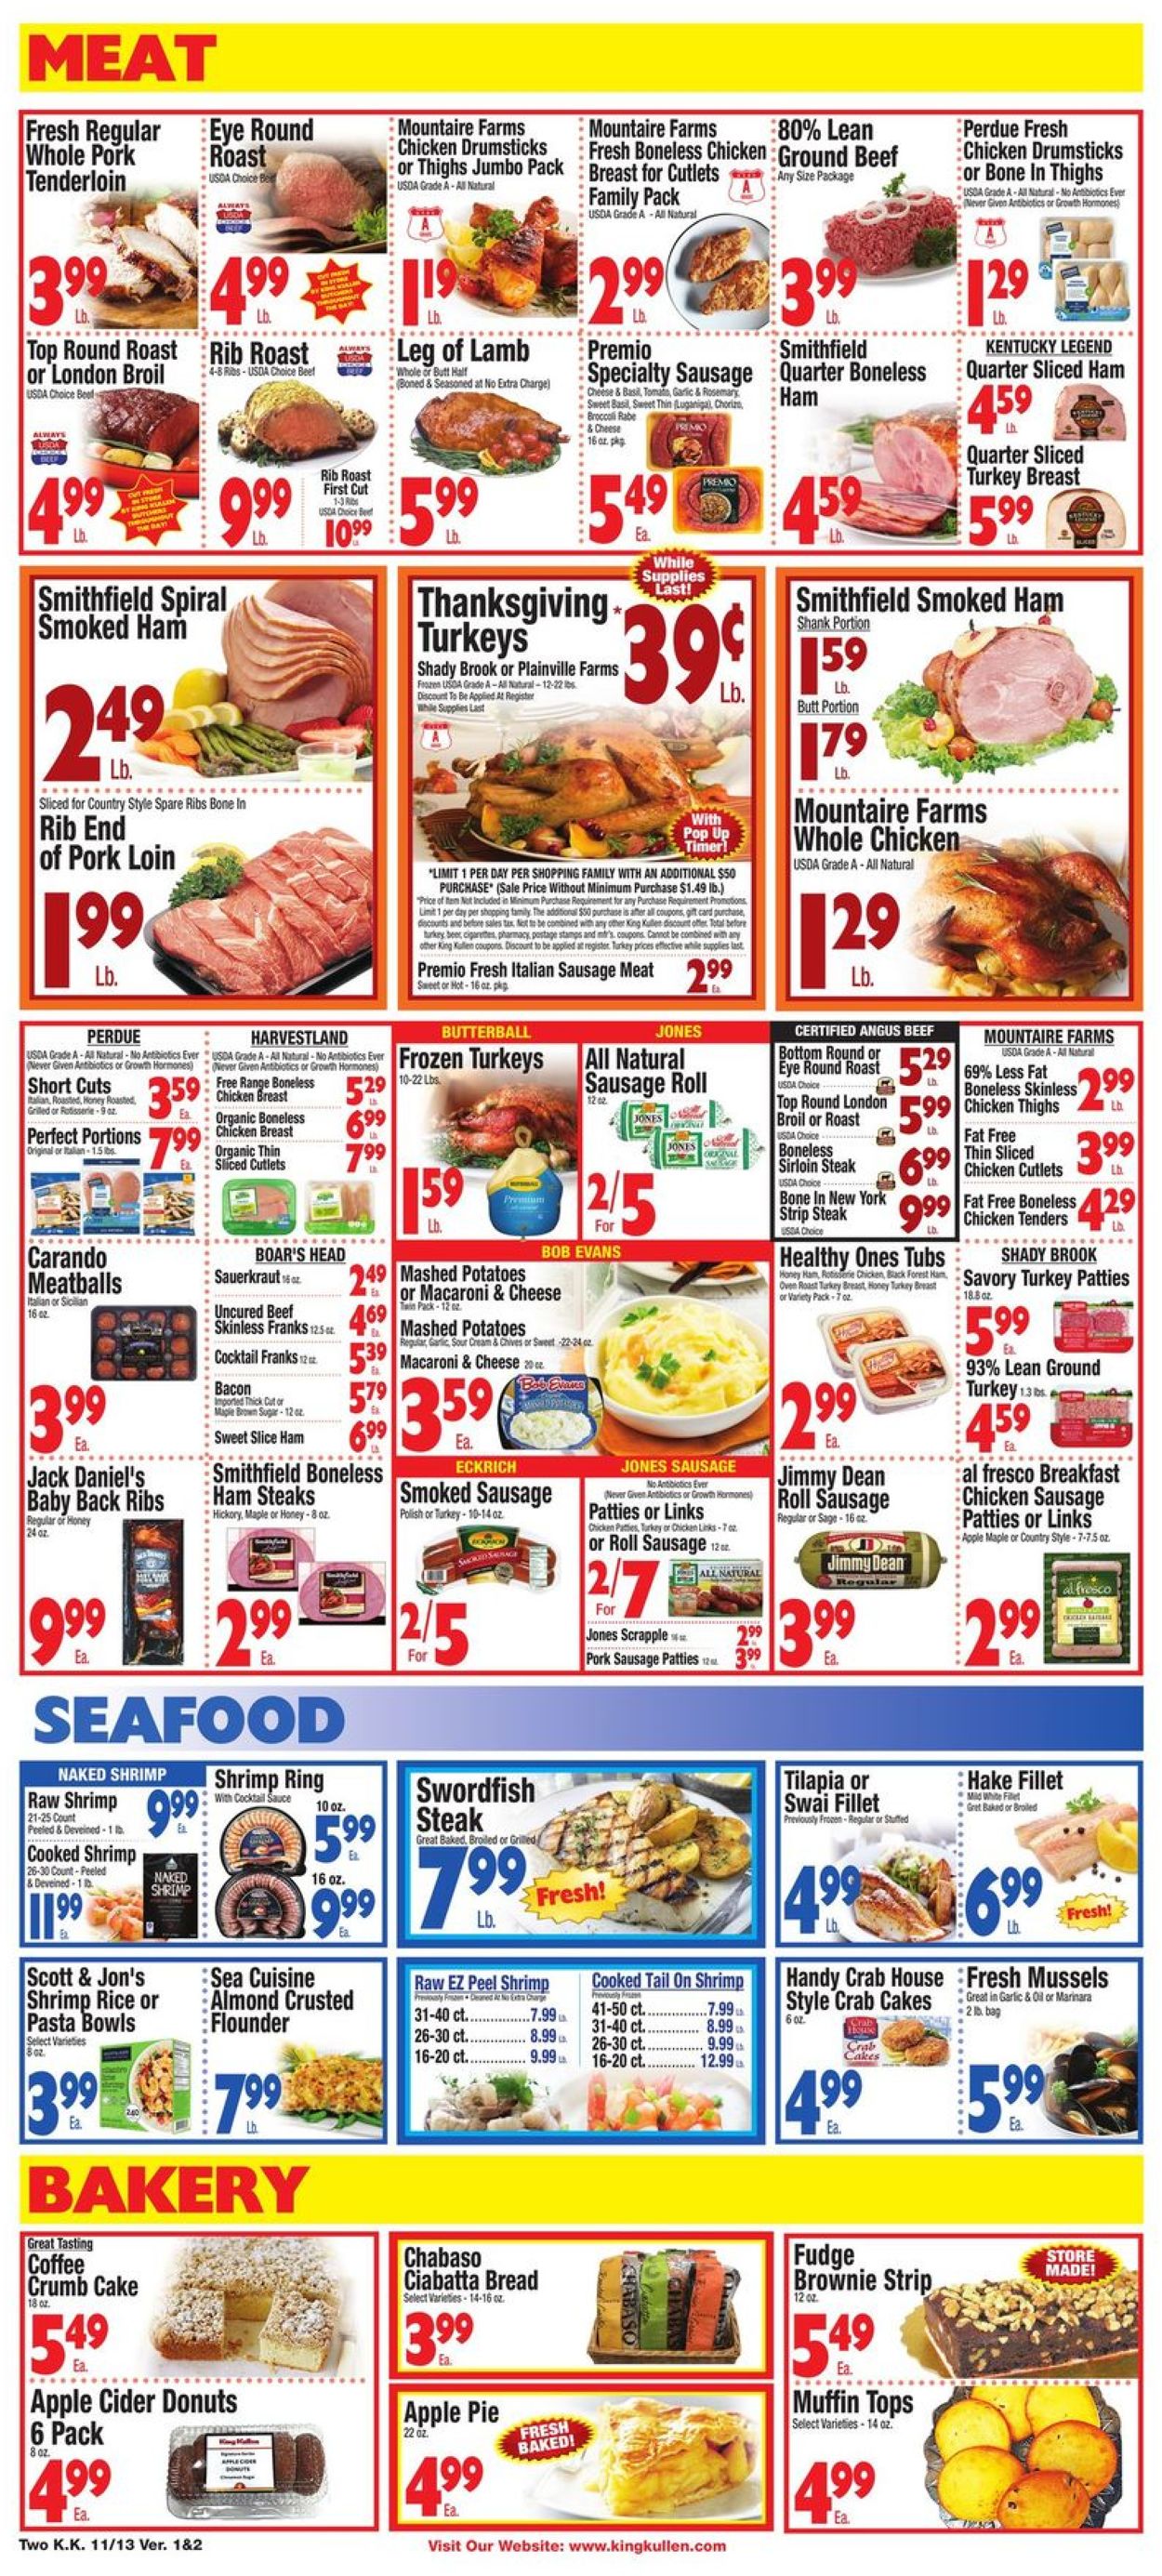 King Kullen Ad from 11/13/2020